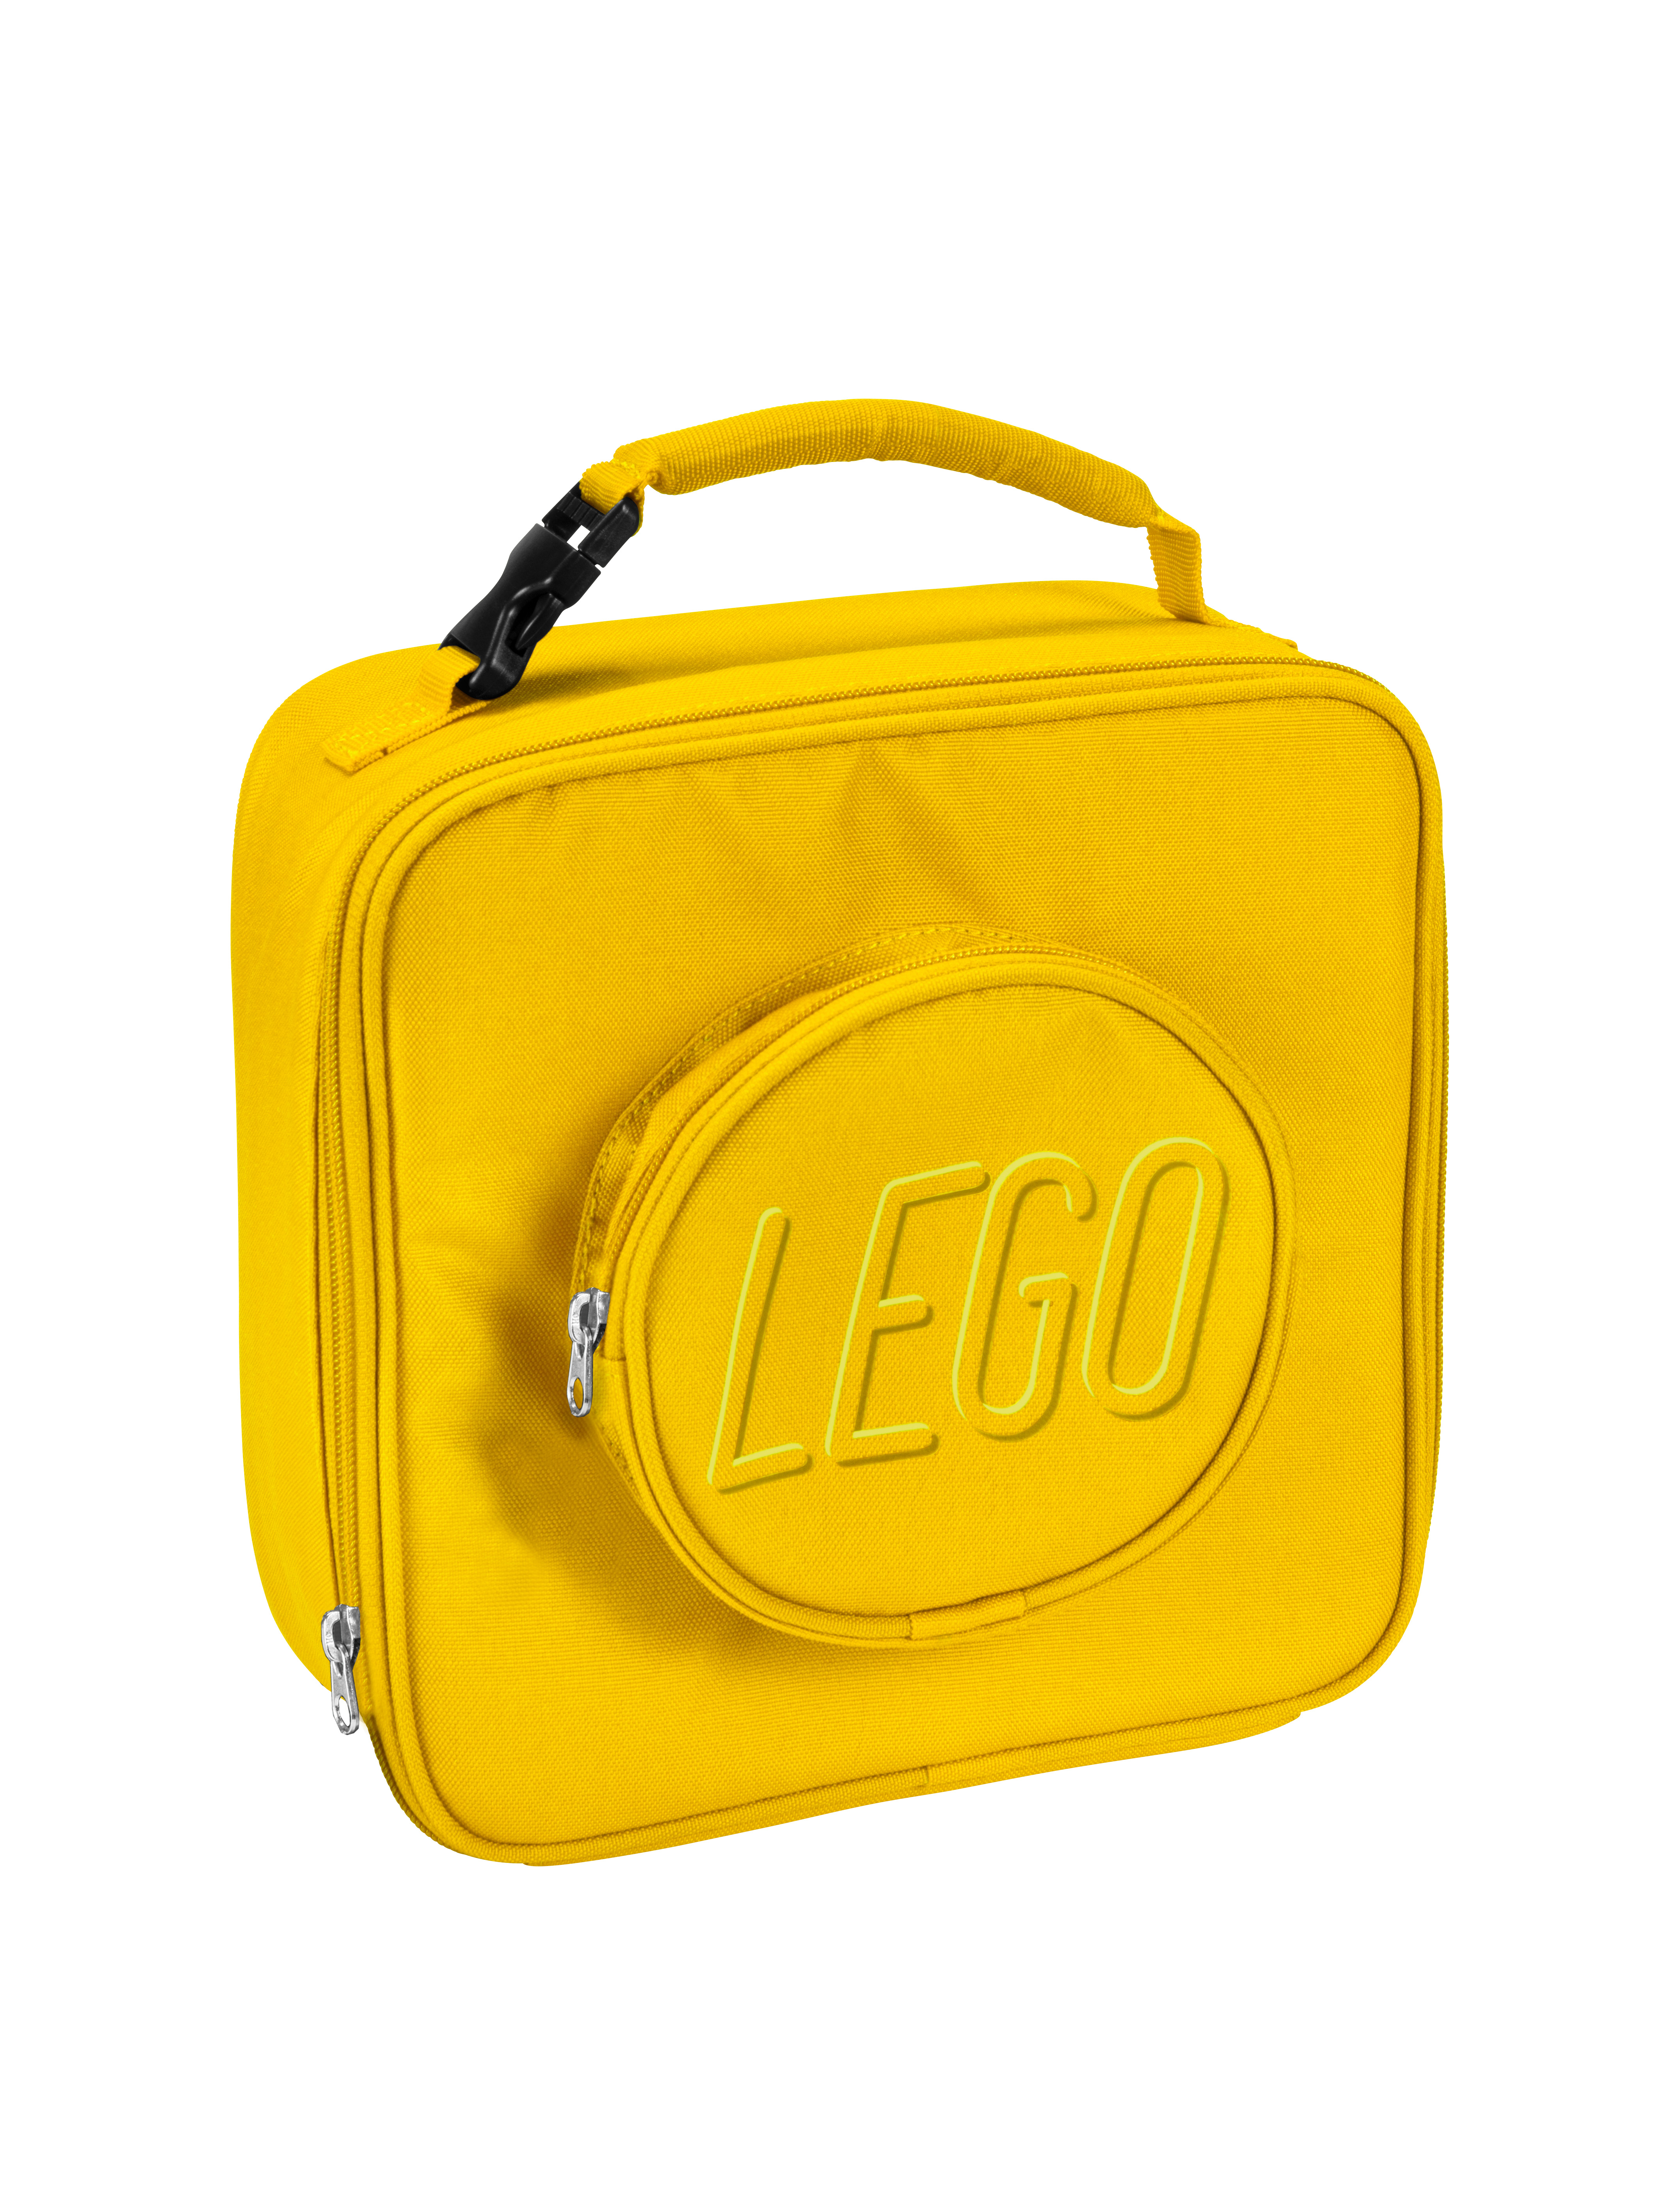 Lego Lunch Box With Handle 4 Knob Kids Classic Bright Red Brand